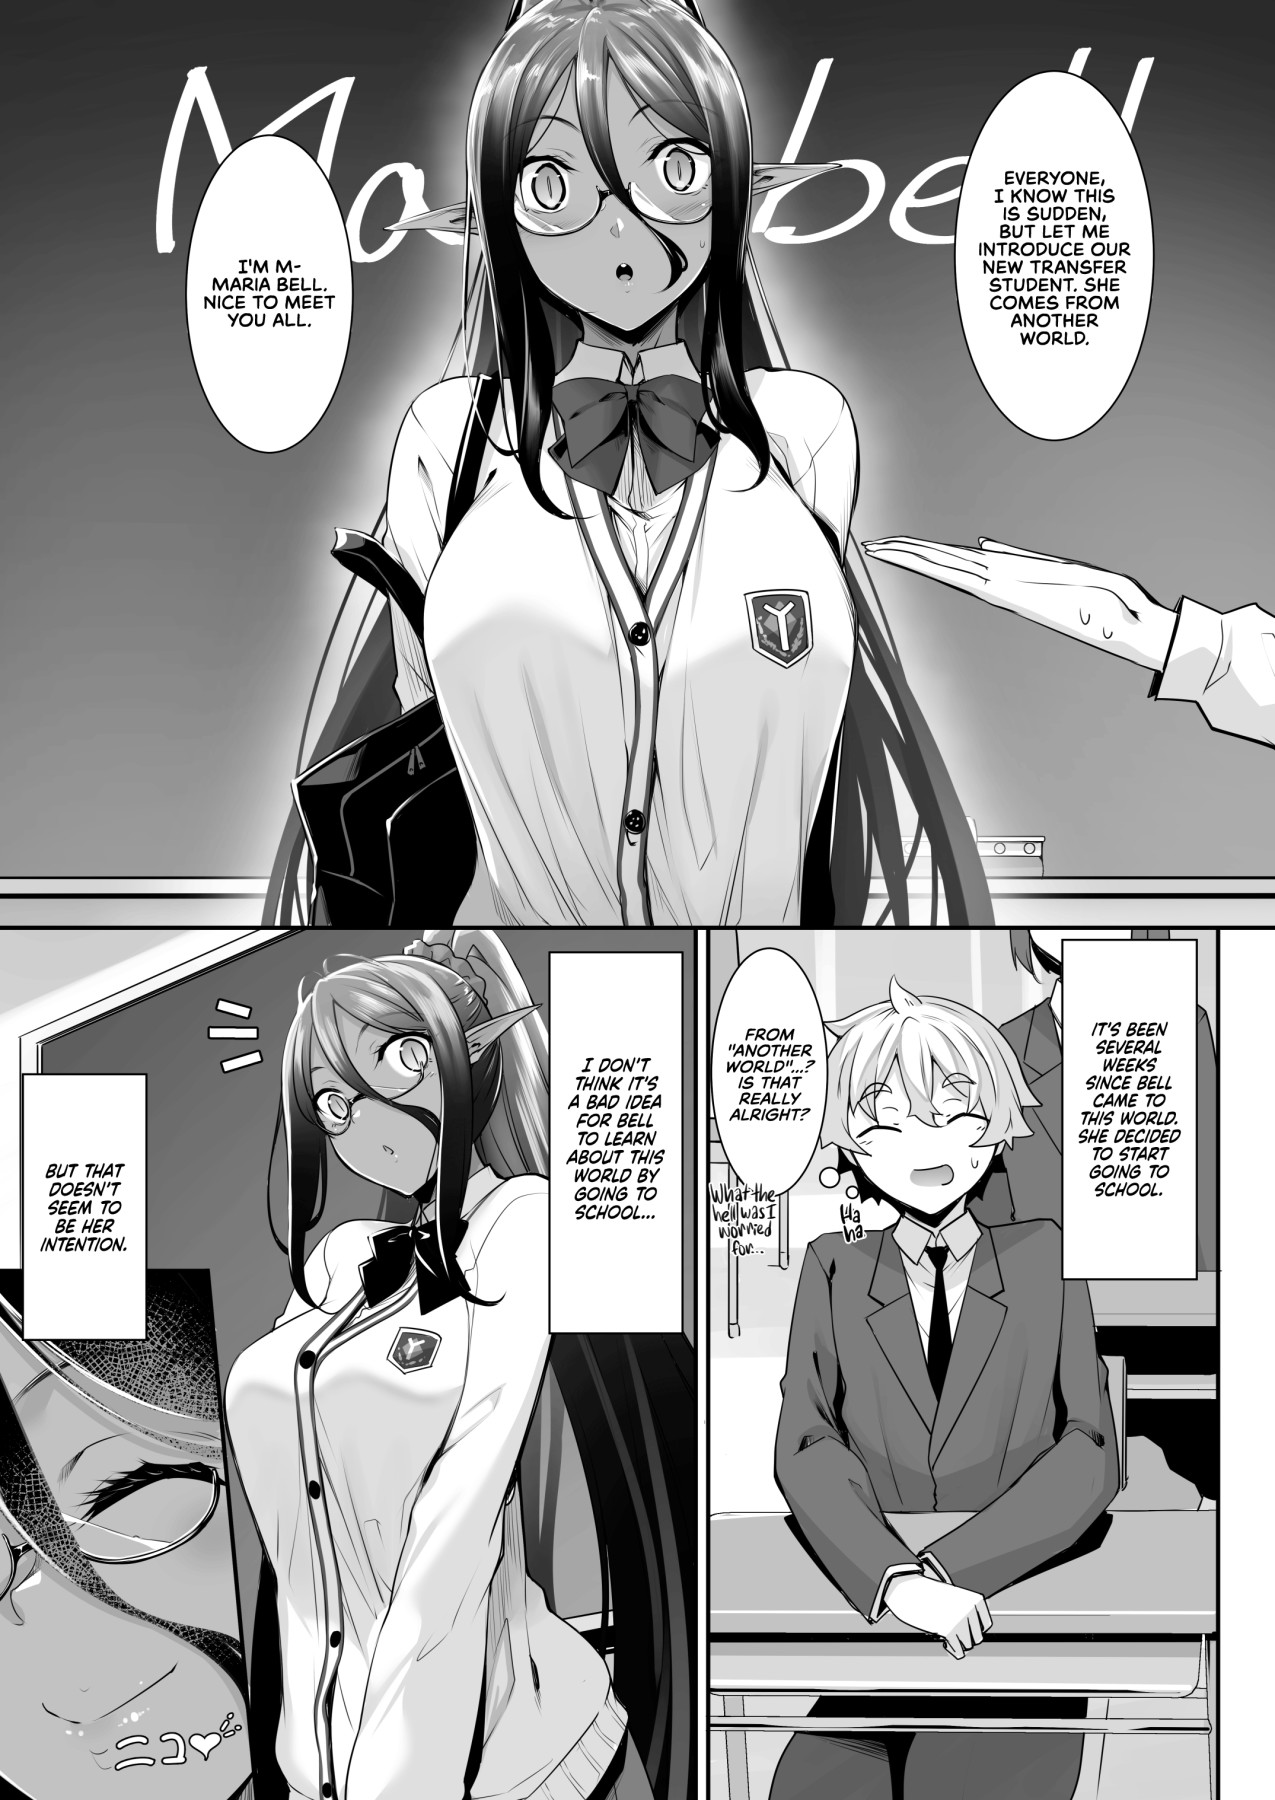 Hentai Manga Comic-A Slightly Clingy Dark Elf Chased Me From Another World 2-Read-2